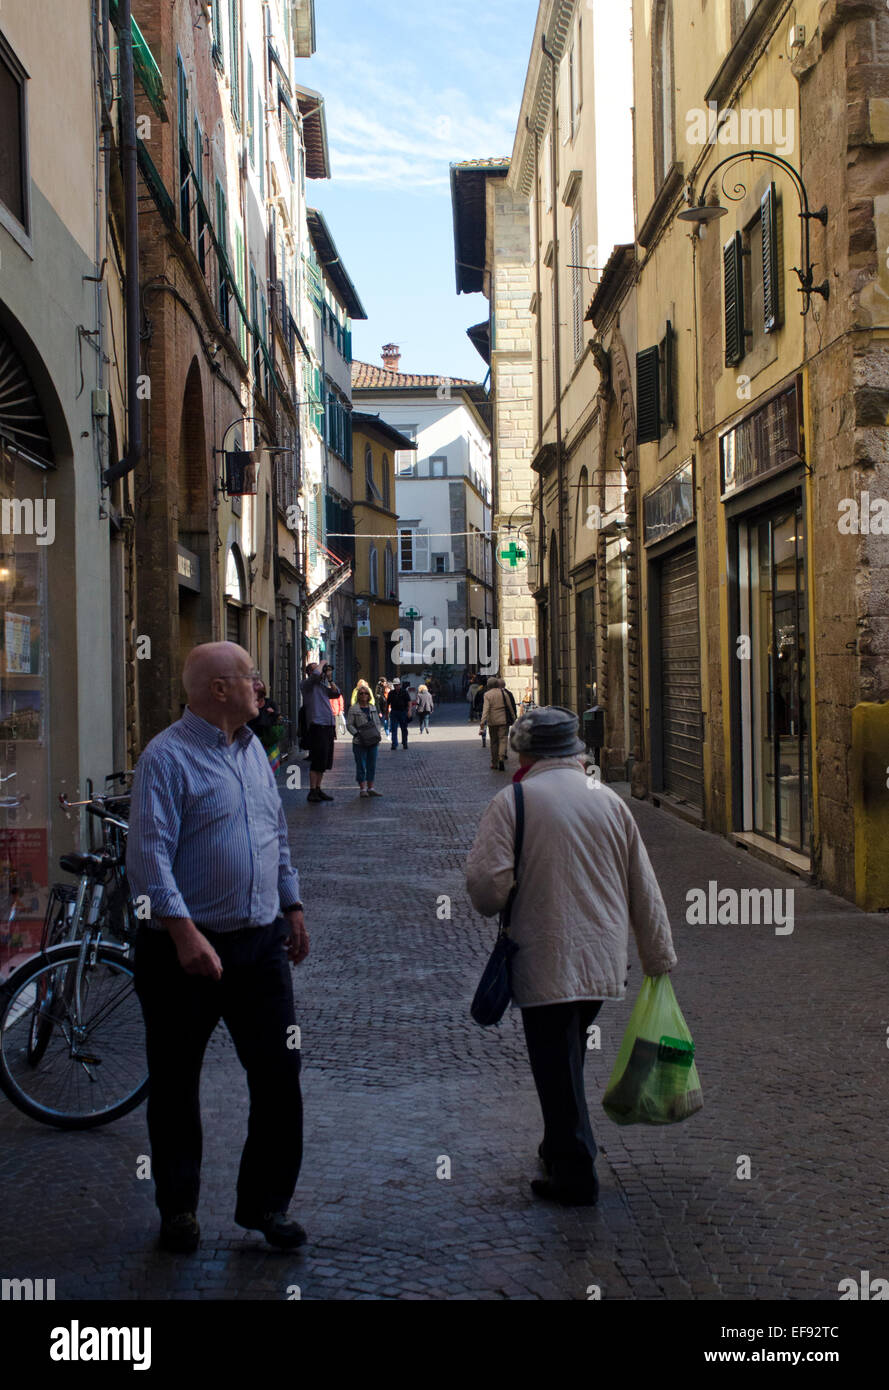 Street scene in the medieval city of Lucca, Tuscany, Italy Stock Photo